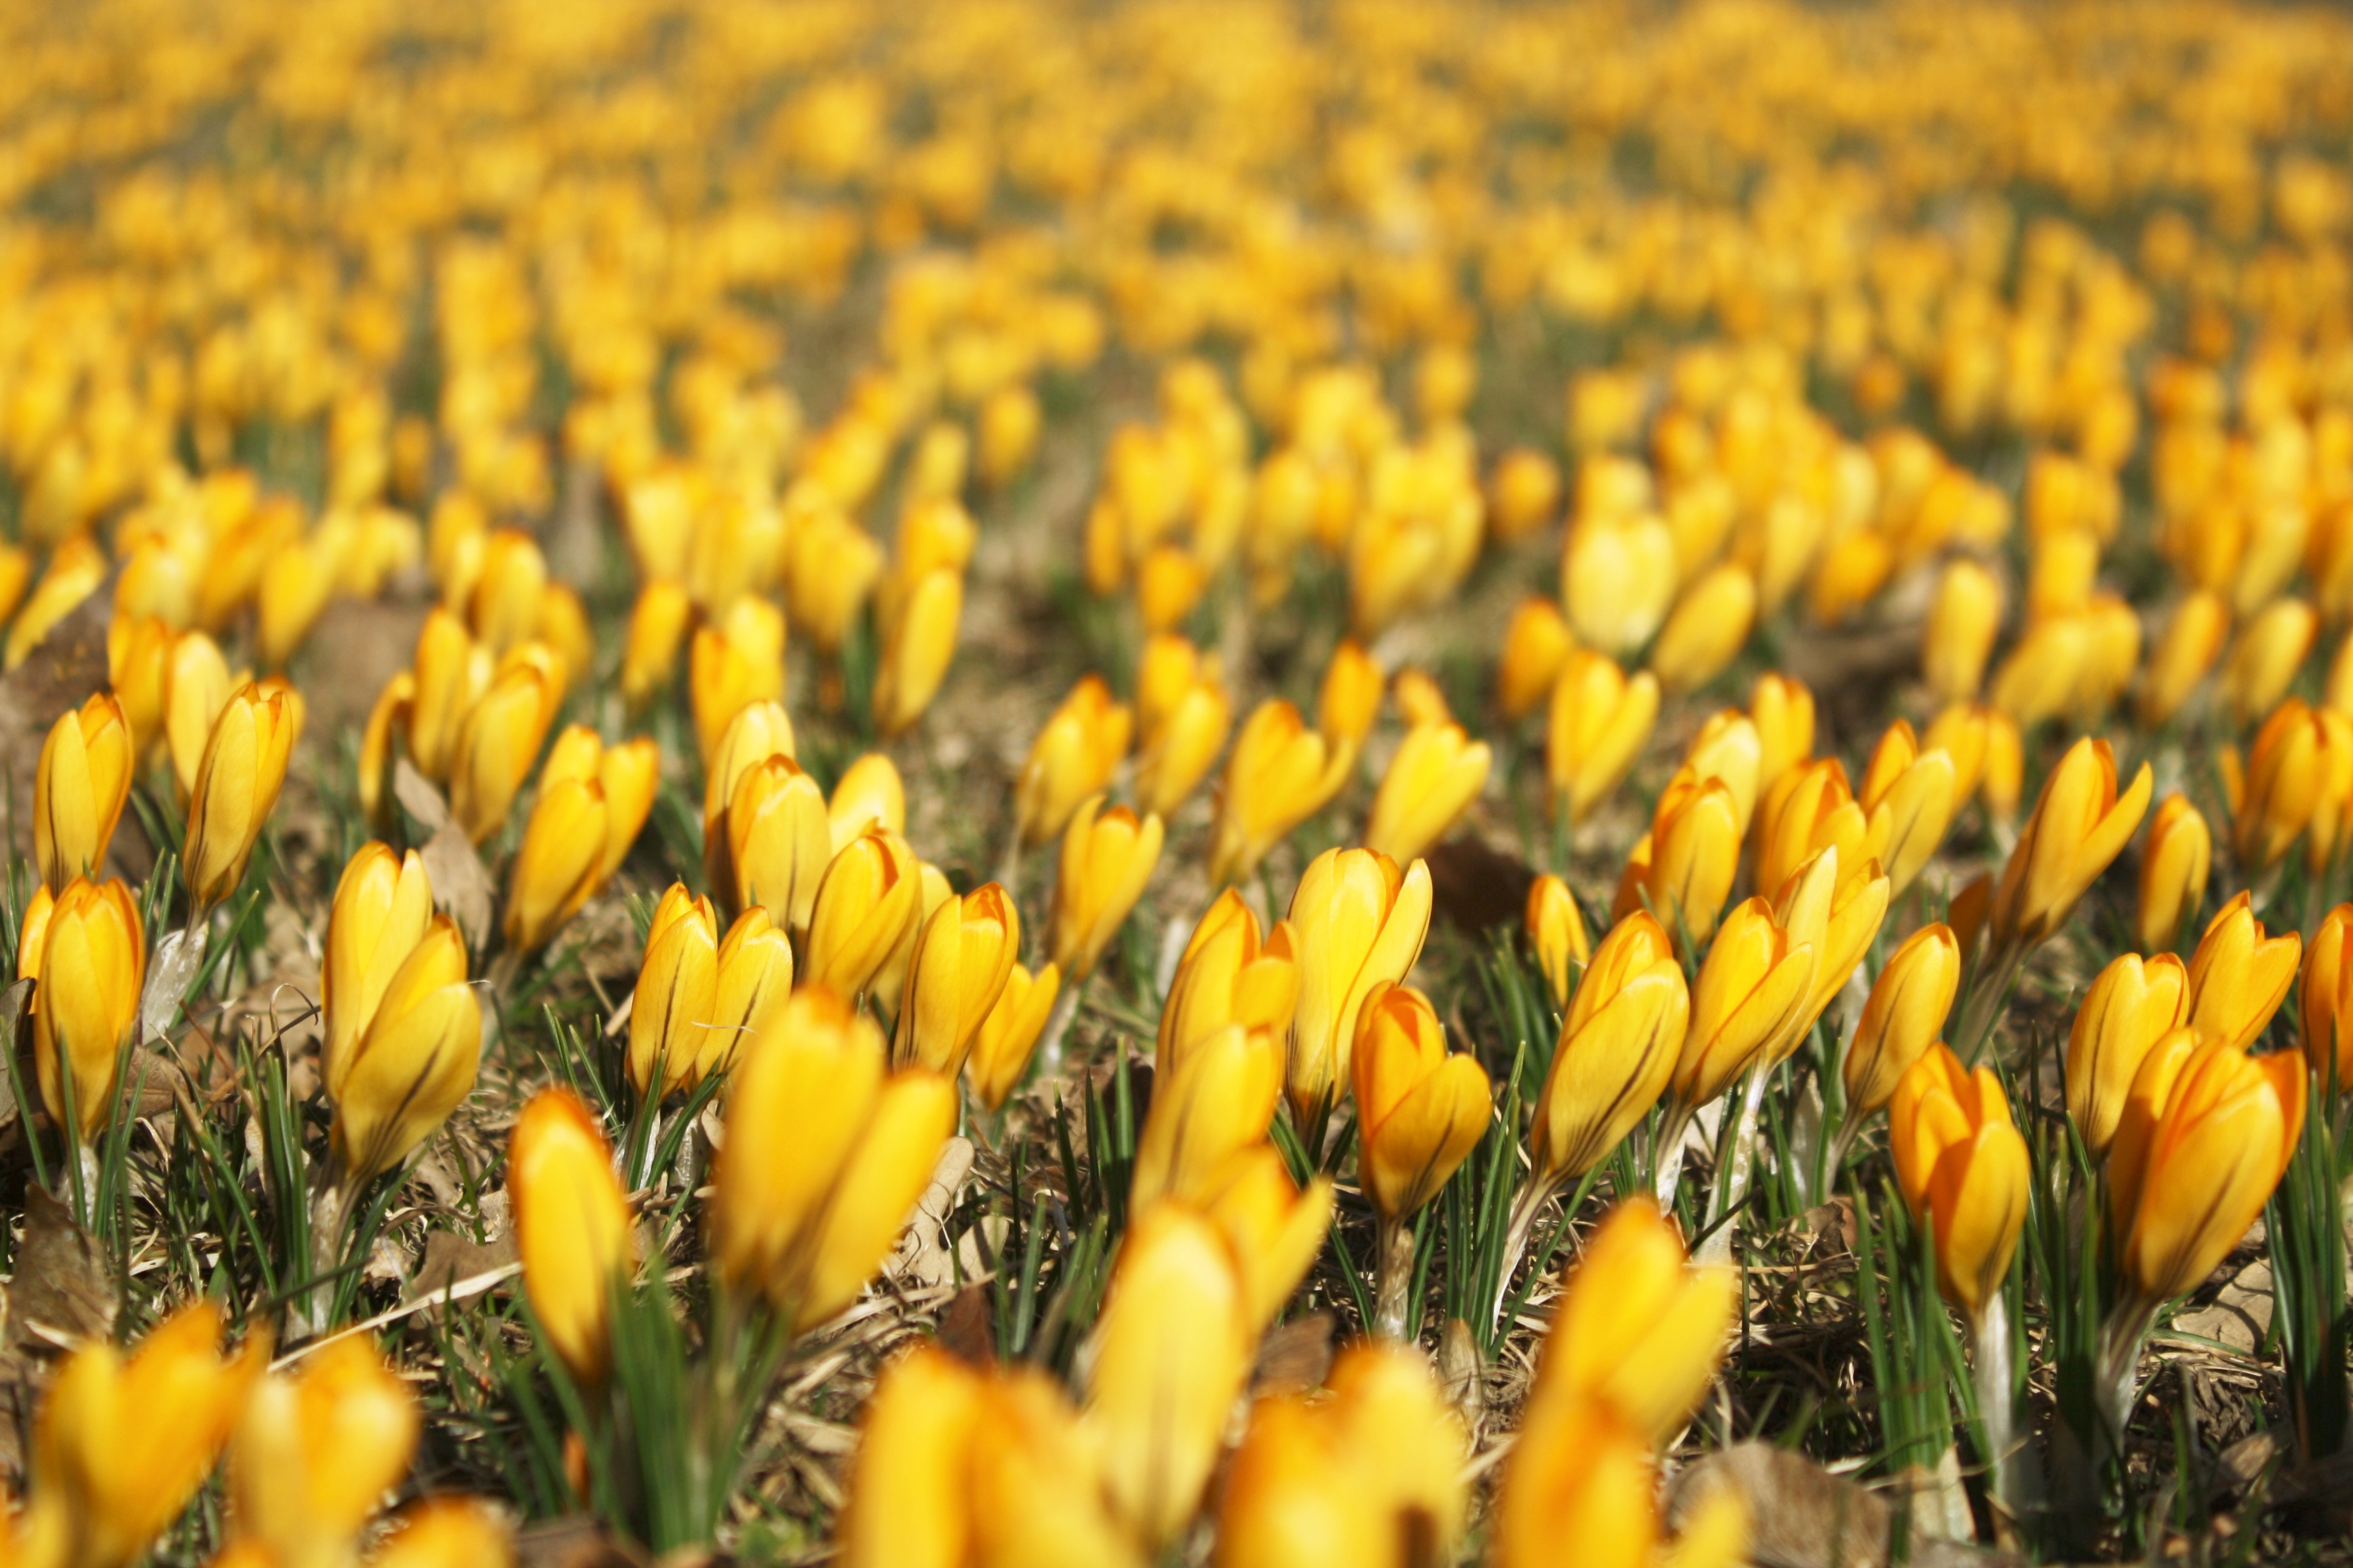 Daffodil Buds by the Floral Clock.jpg